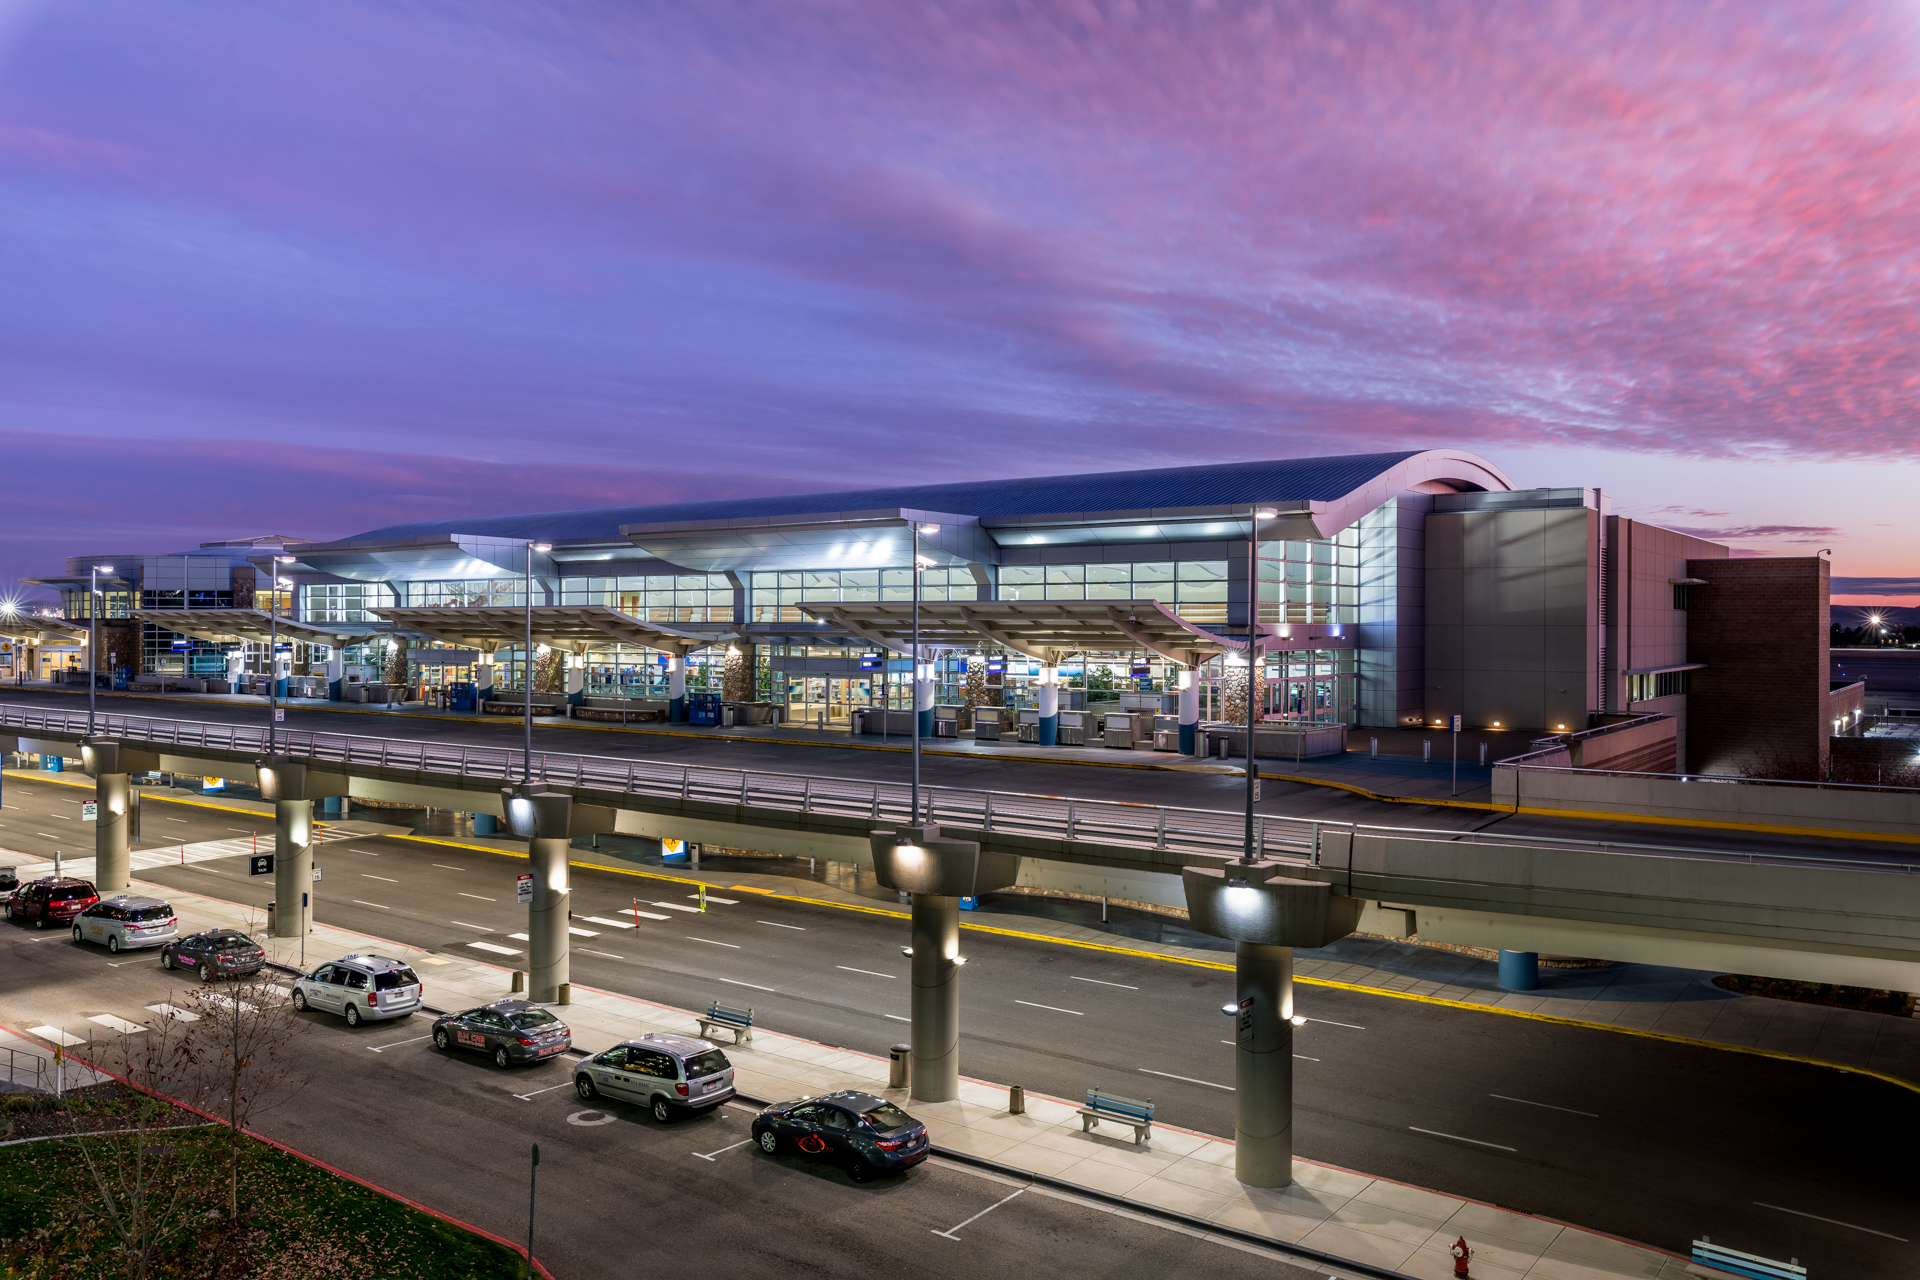 The landside entrance to Boise Airport's curved architecture shines purple and blue at sunset.